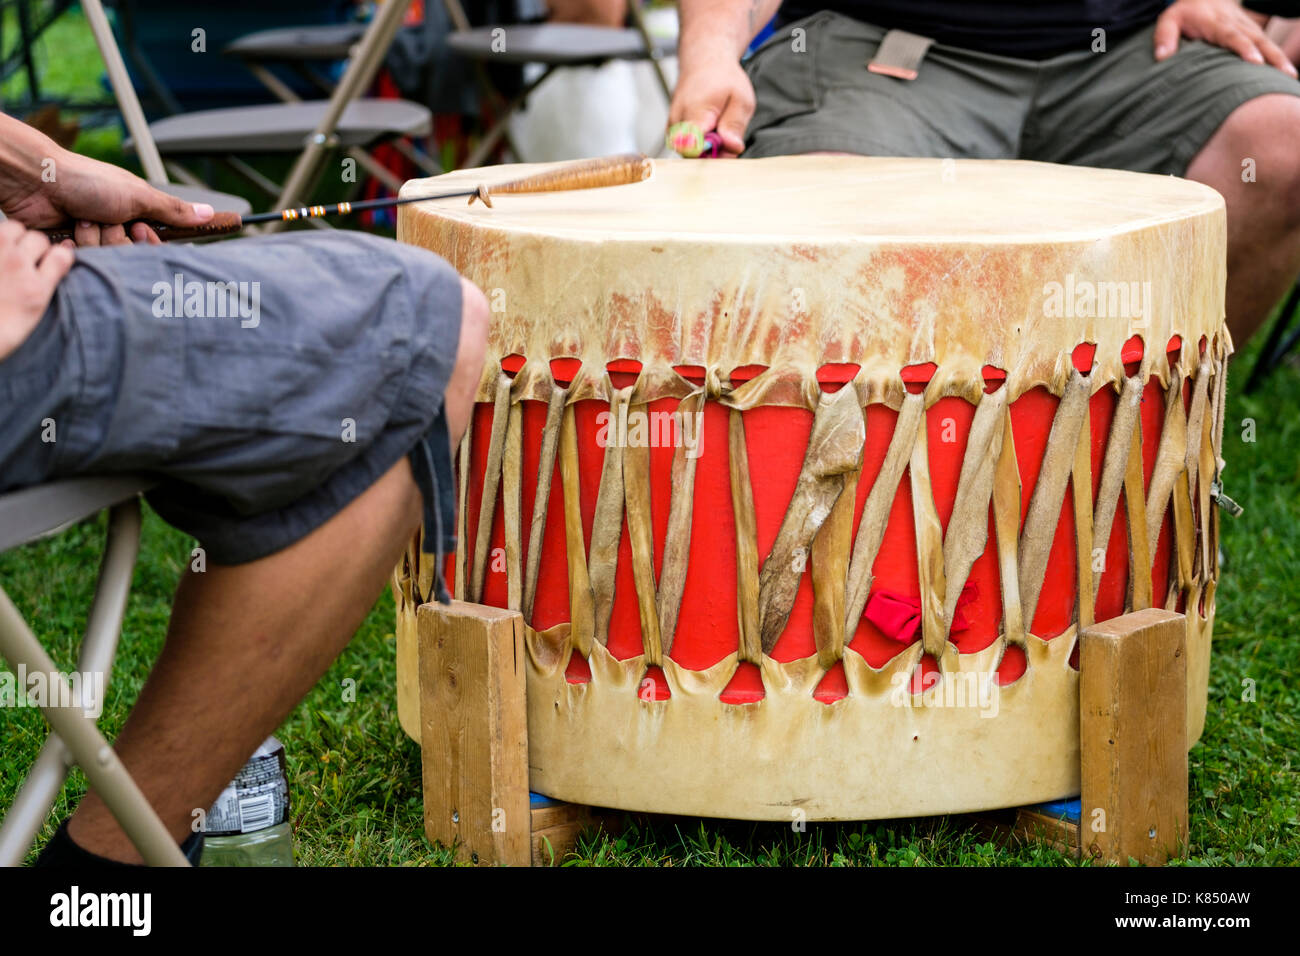 Canada indigenous, Canada First Nations ceremonial drum used for native  communities ceremonies, dance, and Pow Wow celebrations Stock Photo - Alamy